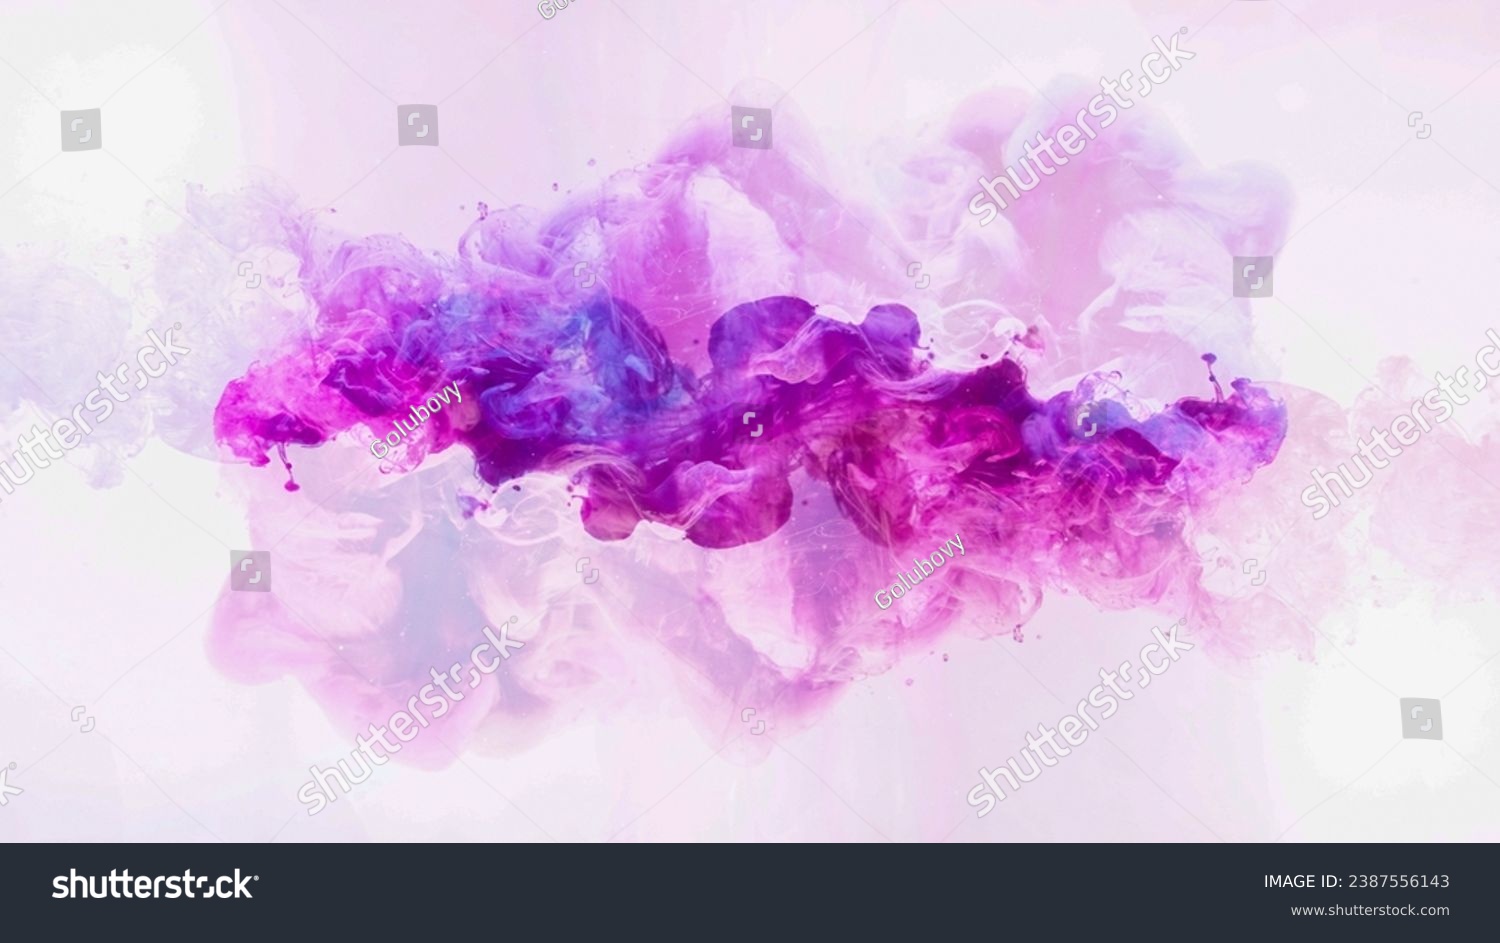 Colorful smoke background. Fantasy cloud. Neon pink blue purple ink hypnotic mix magic paint blend magic haze explosion effect isolated on white. #2387556143